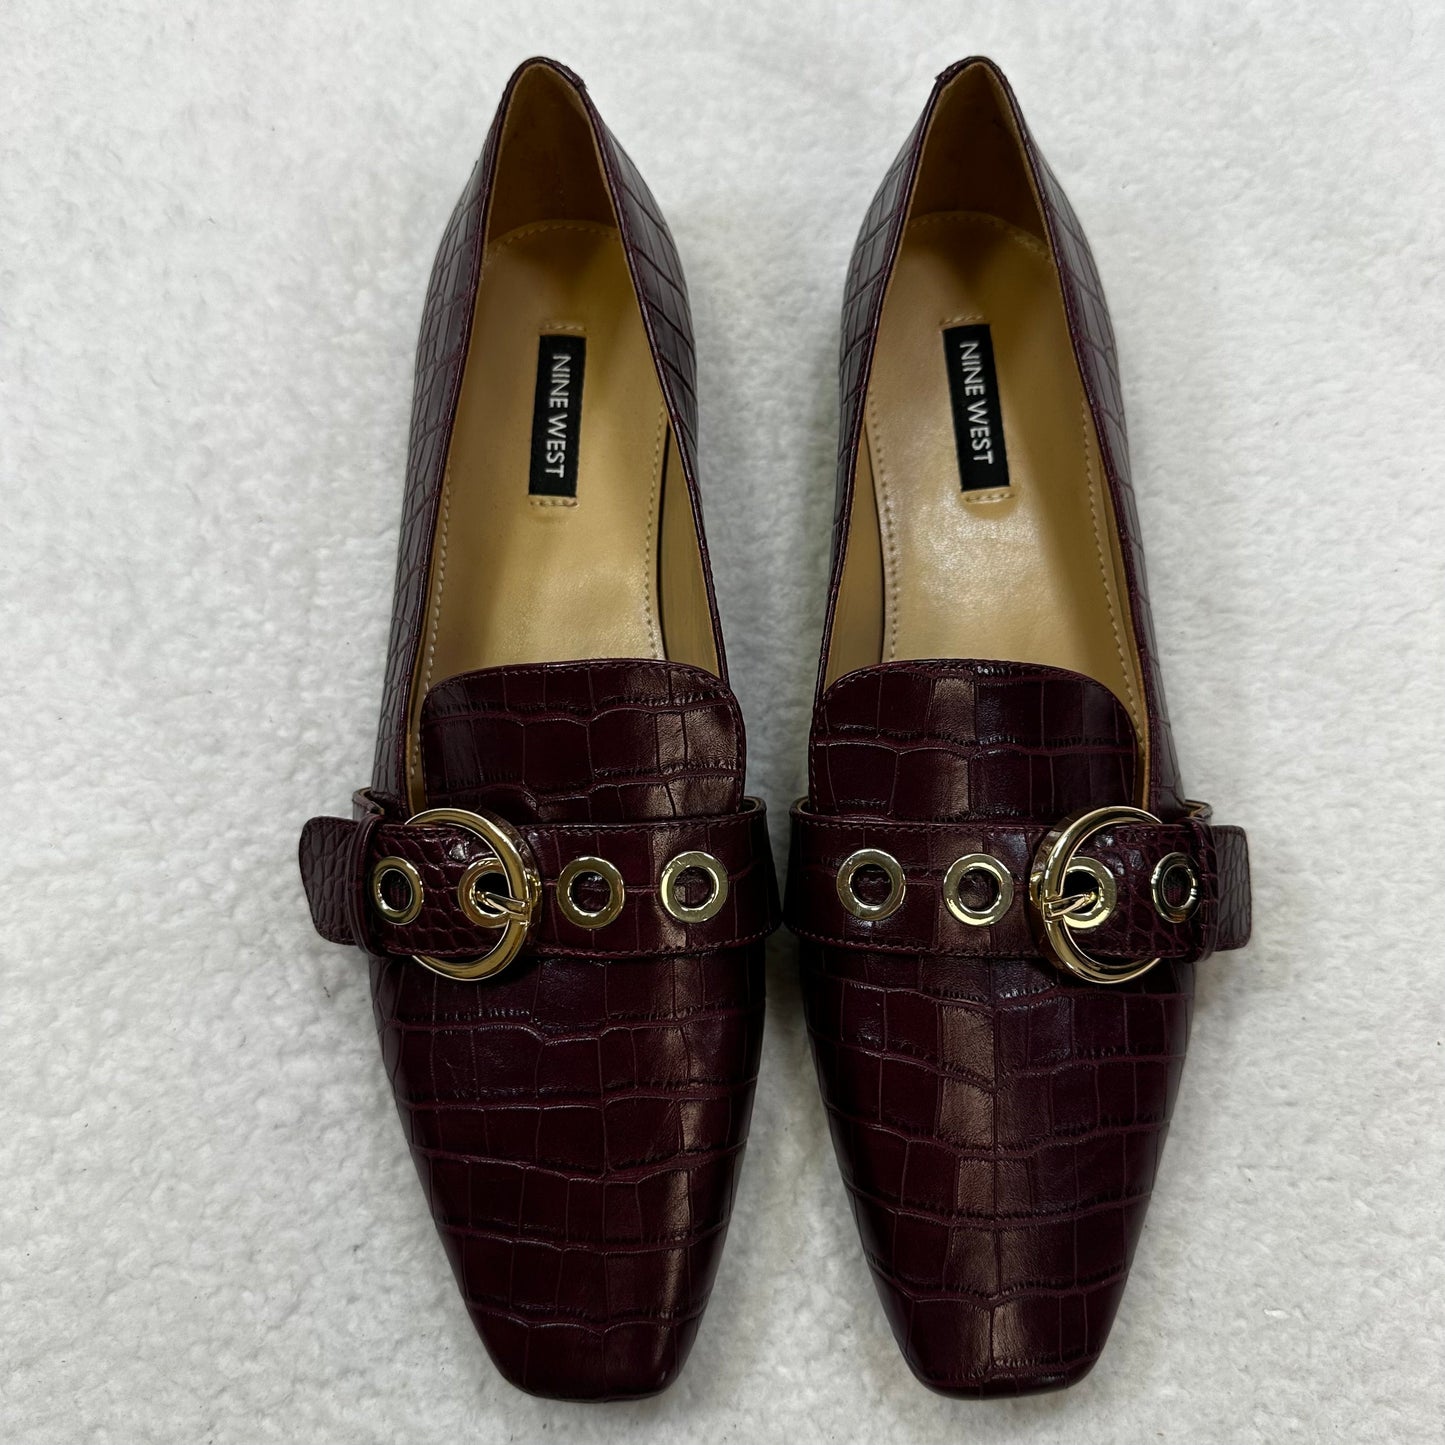 Maroon Shoes Flats Loafer Oxford Nine West, Size 9.5